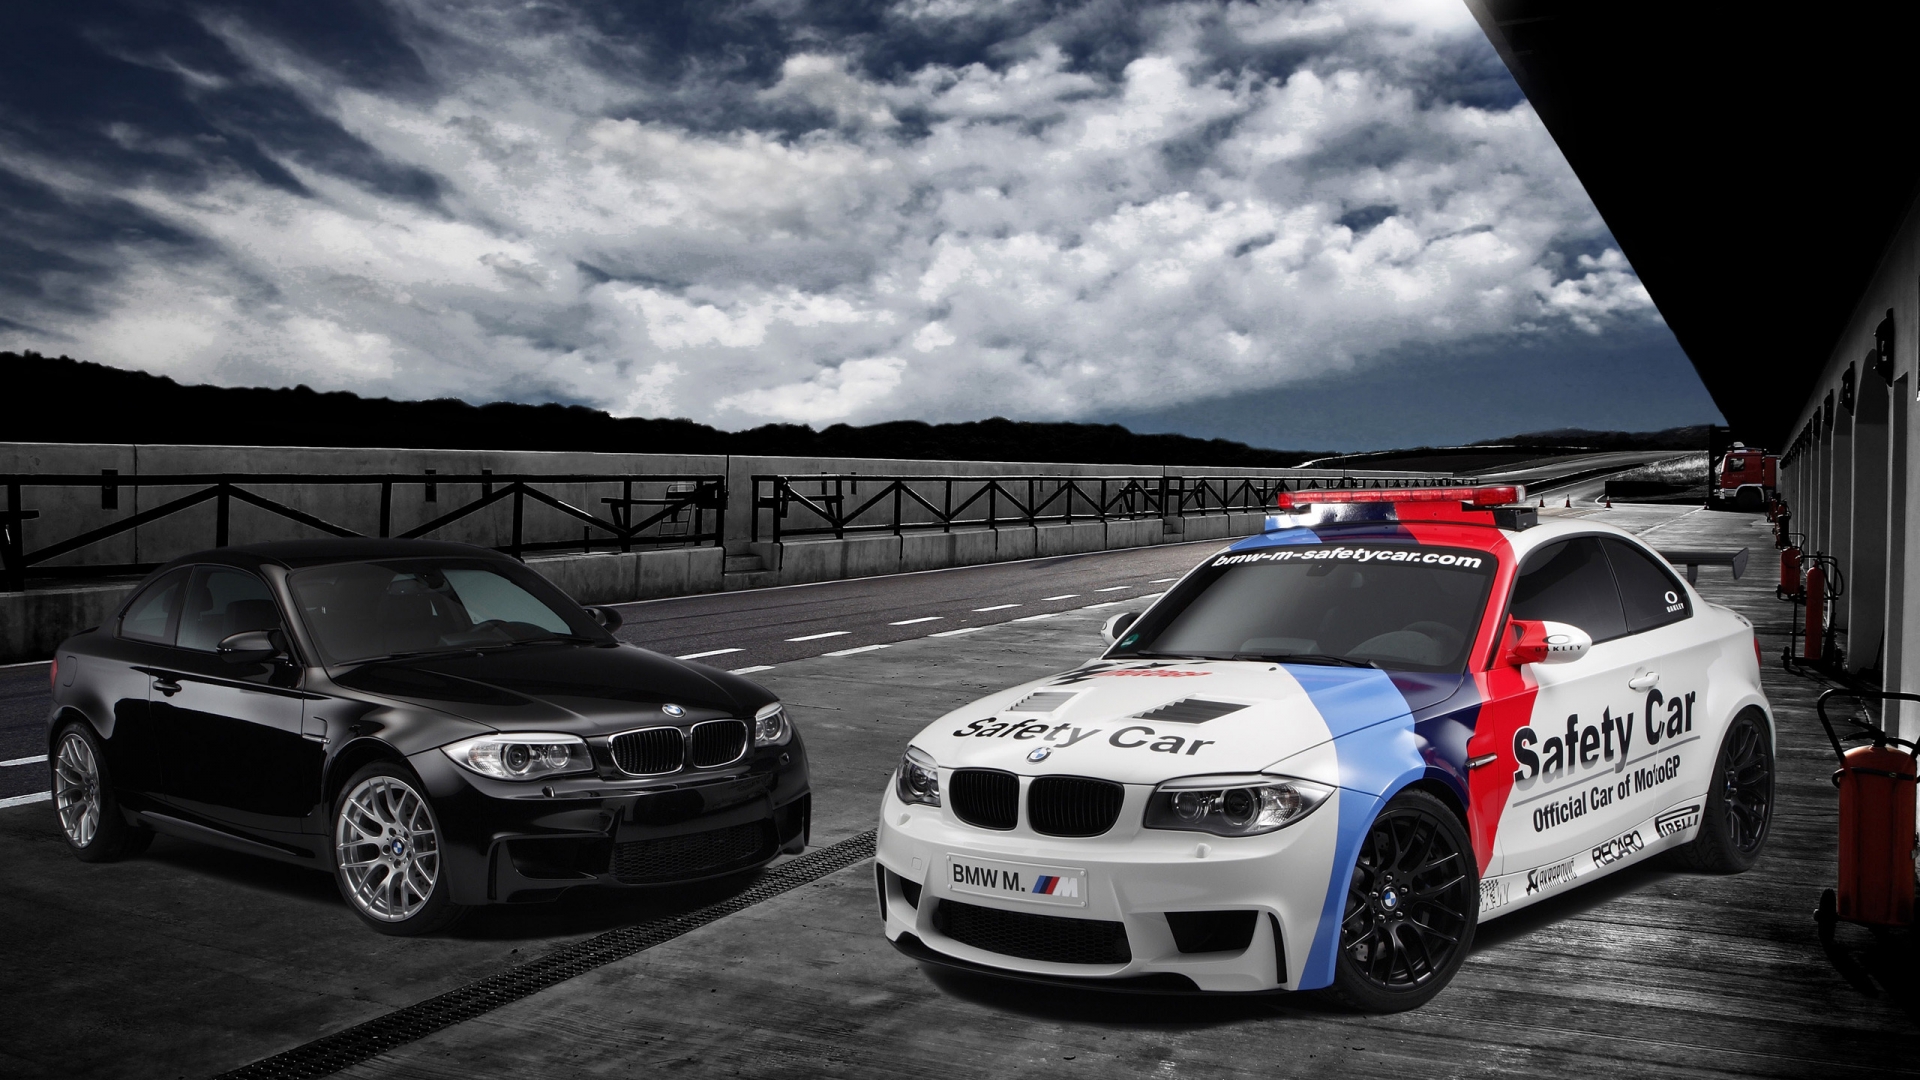 BMW 1 Series M Coupe Safety Car for 1920 x 1080 HDTV 1080p resolution